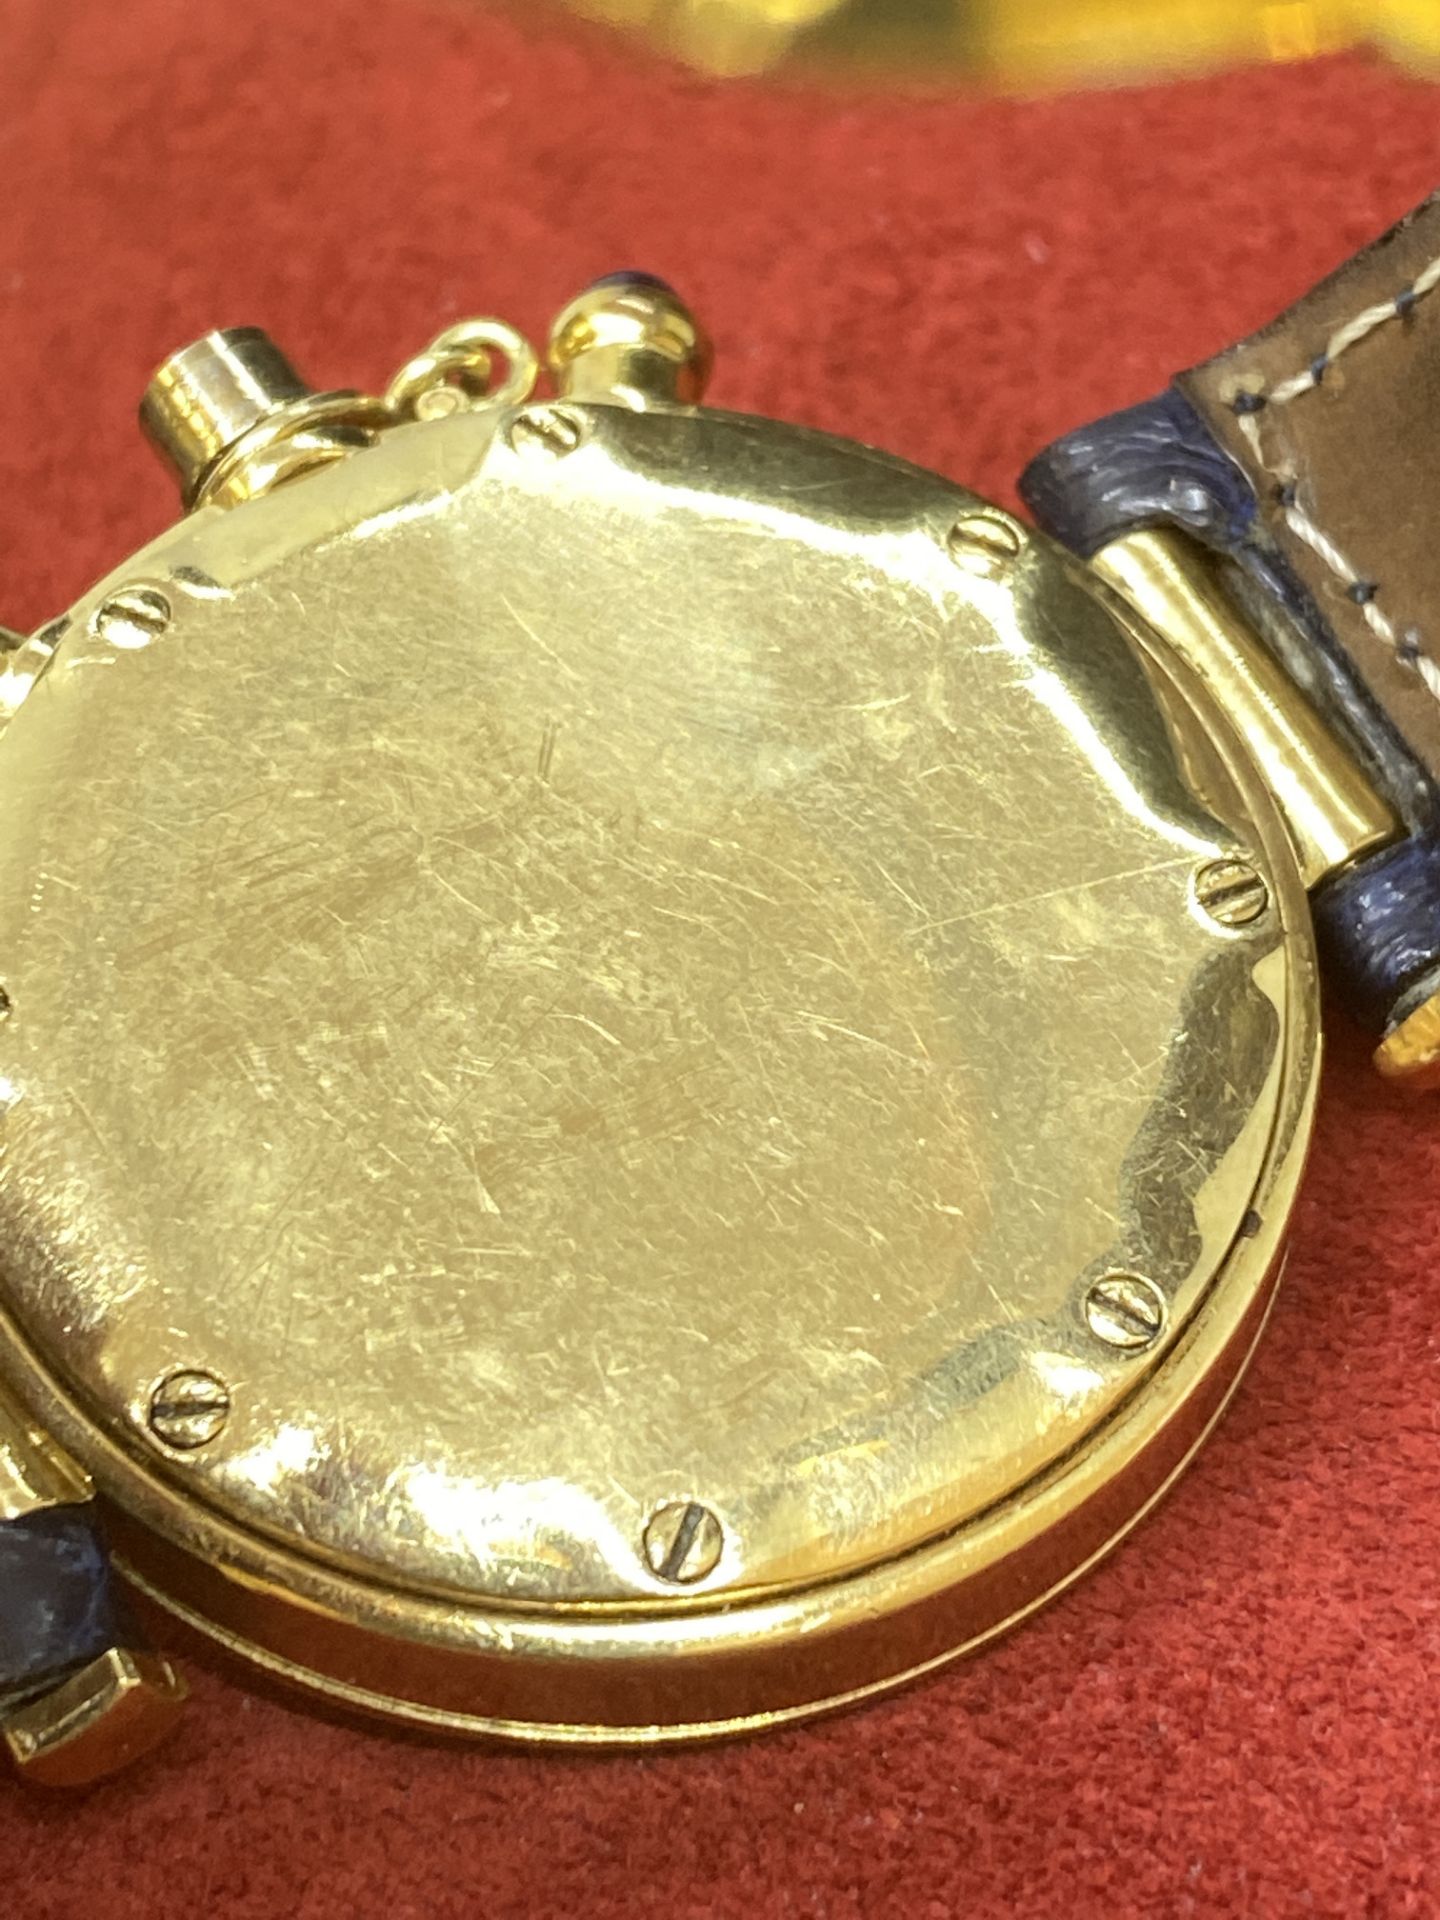 CARTIER CHRONO 18k GOLD WATCH - Image 3 of 12